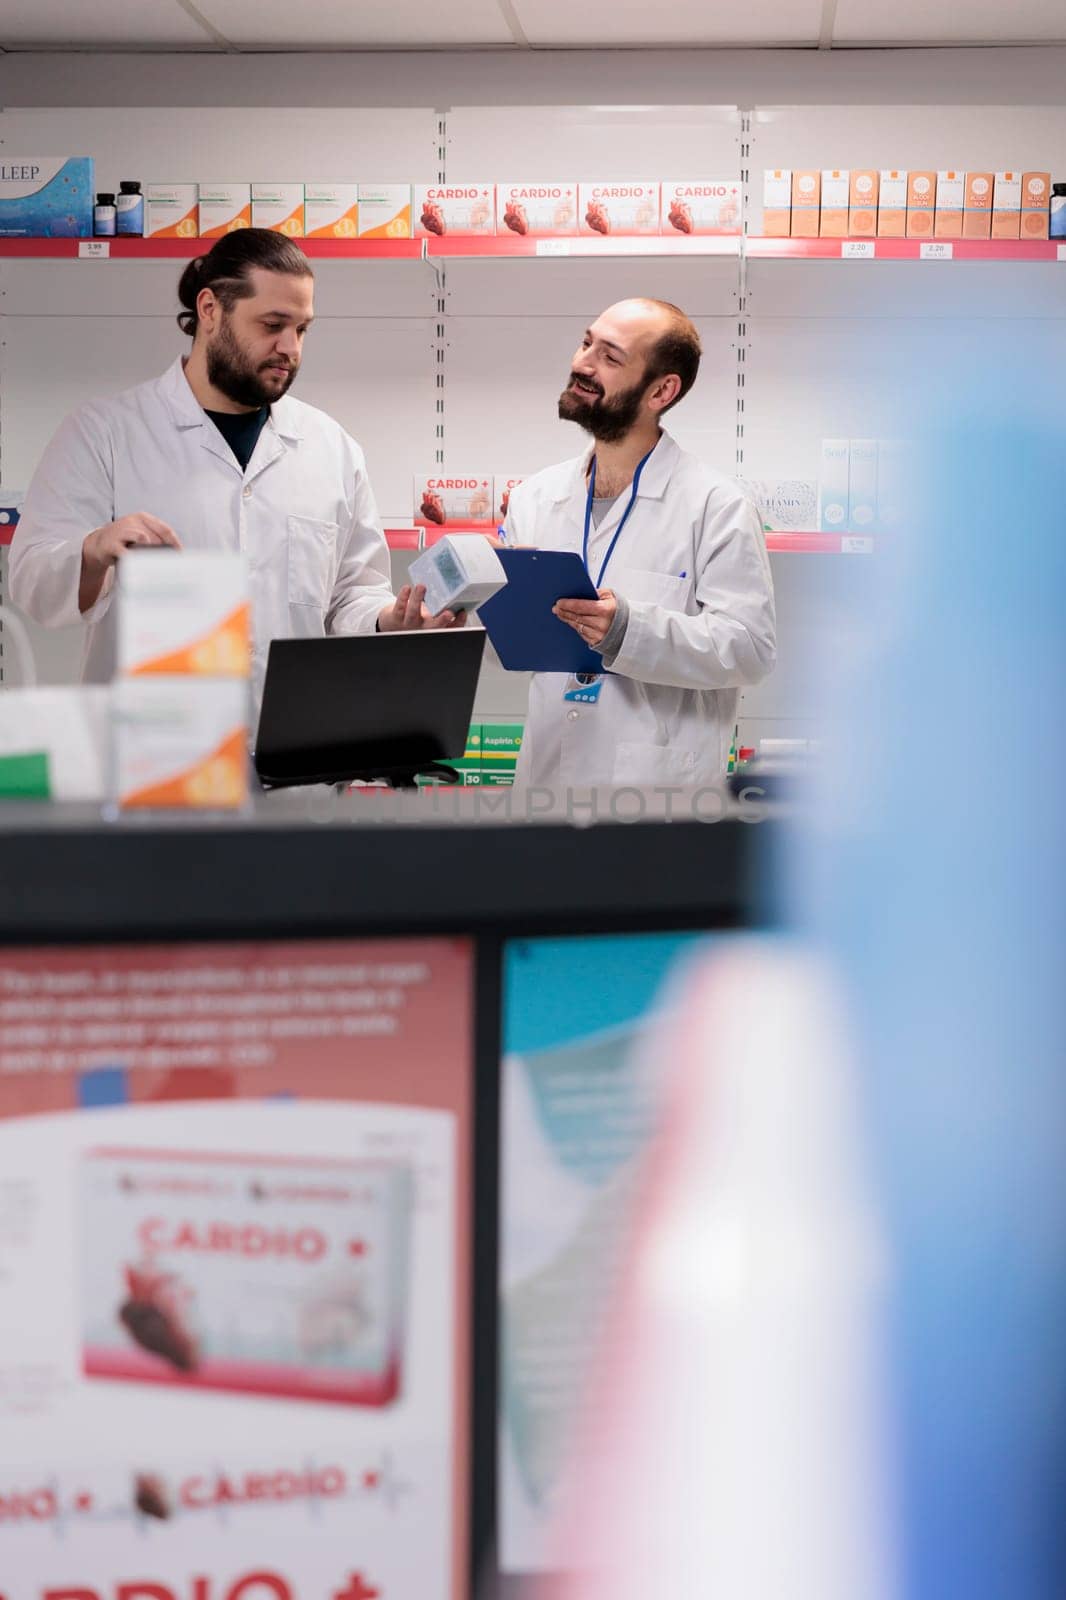 Drugstore colleagues standing at counter desk doing medication and pharmaceutical products inventory in pharmacy. Employees is trained to recognize and address any potential drug interactions